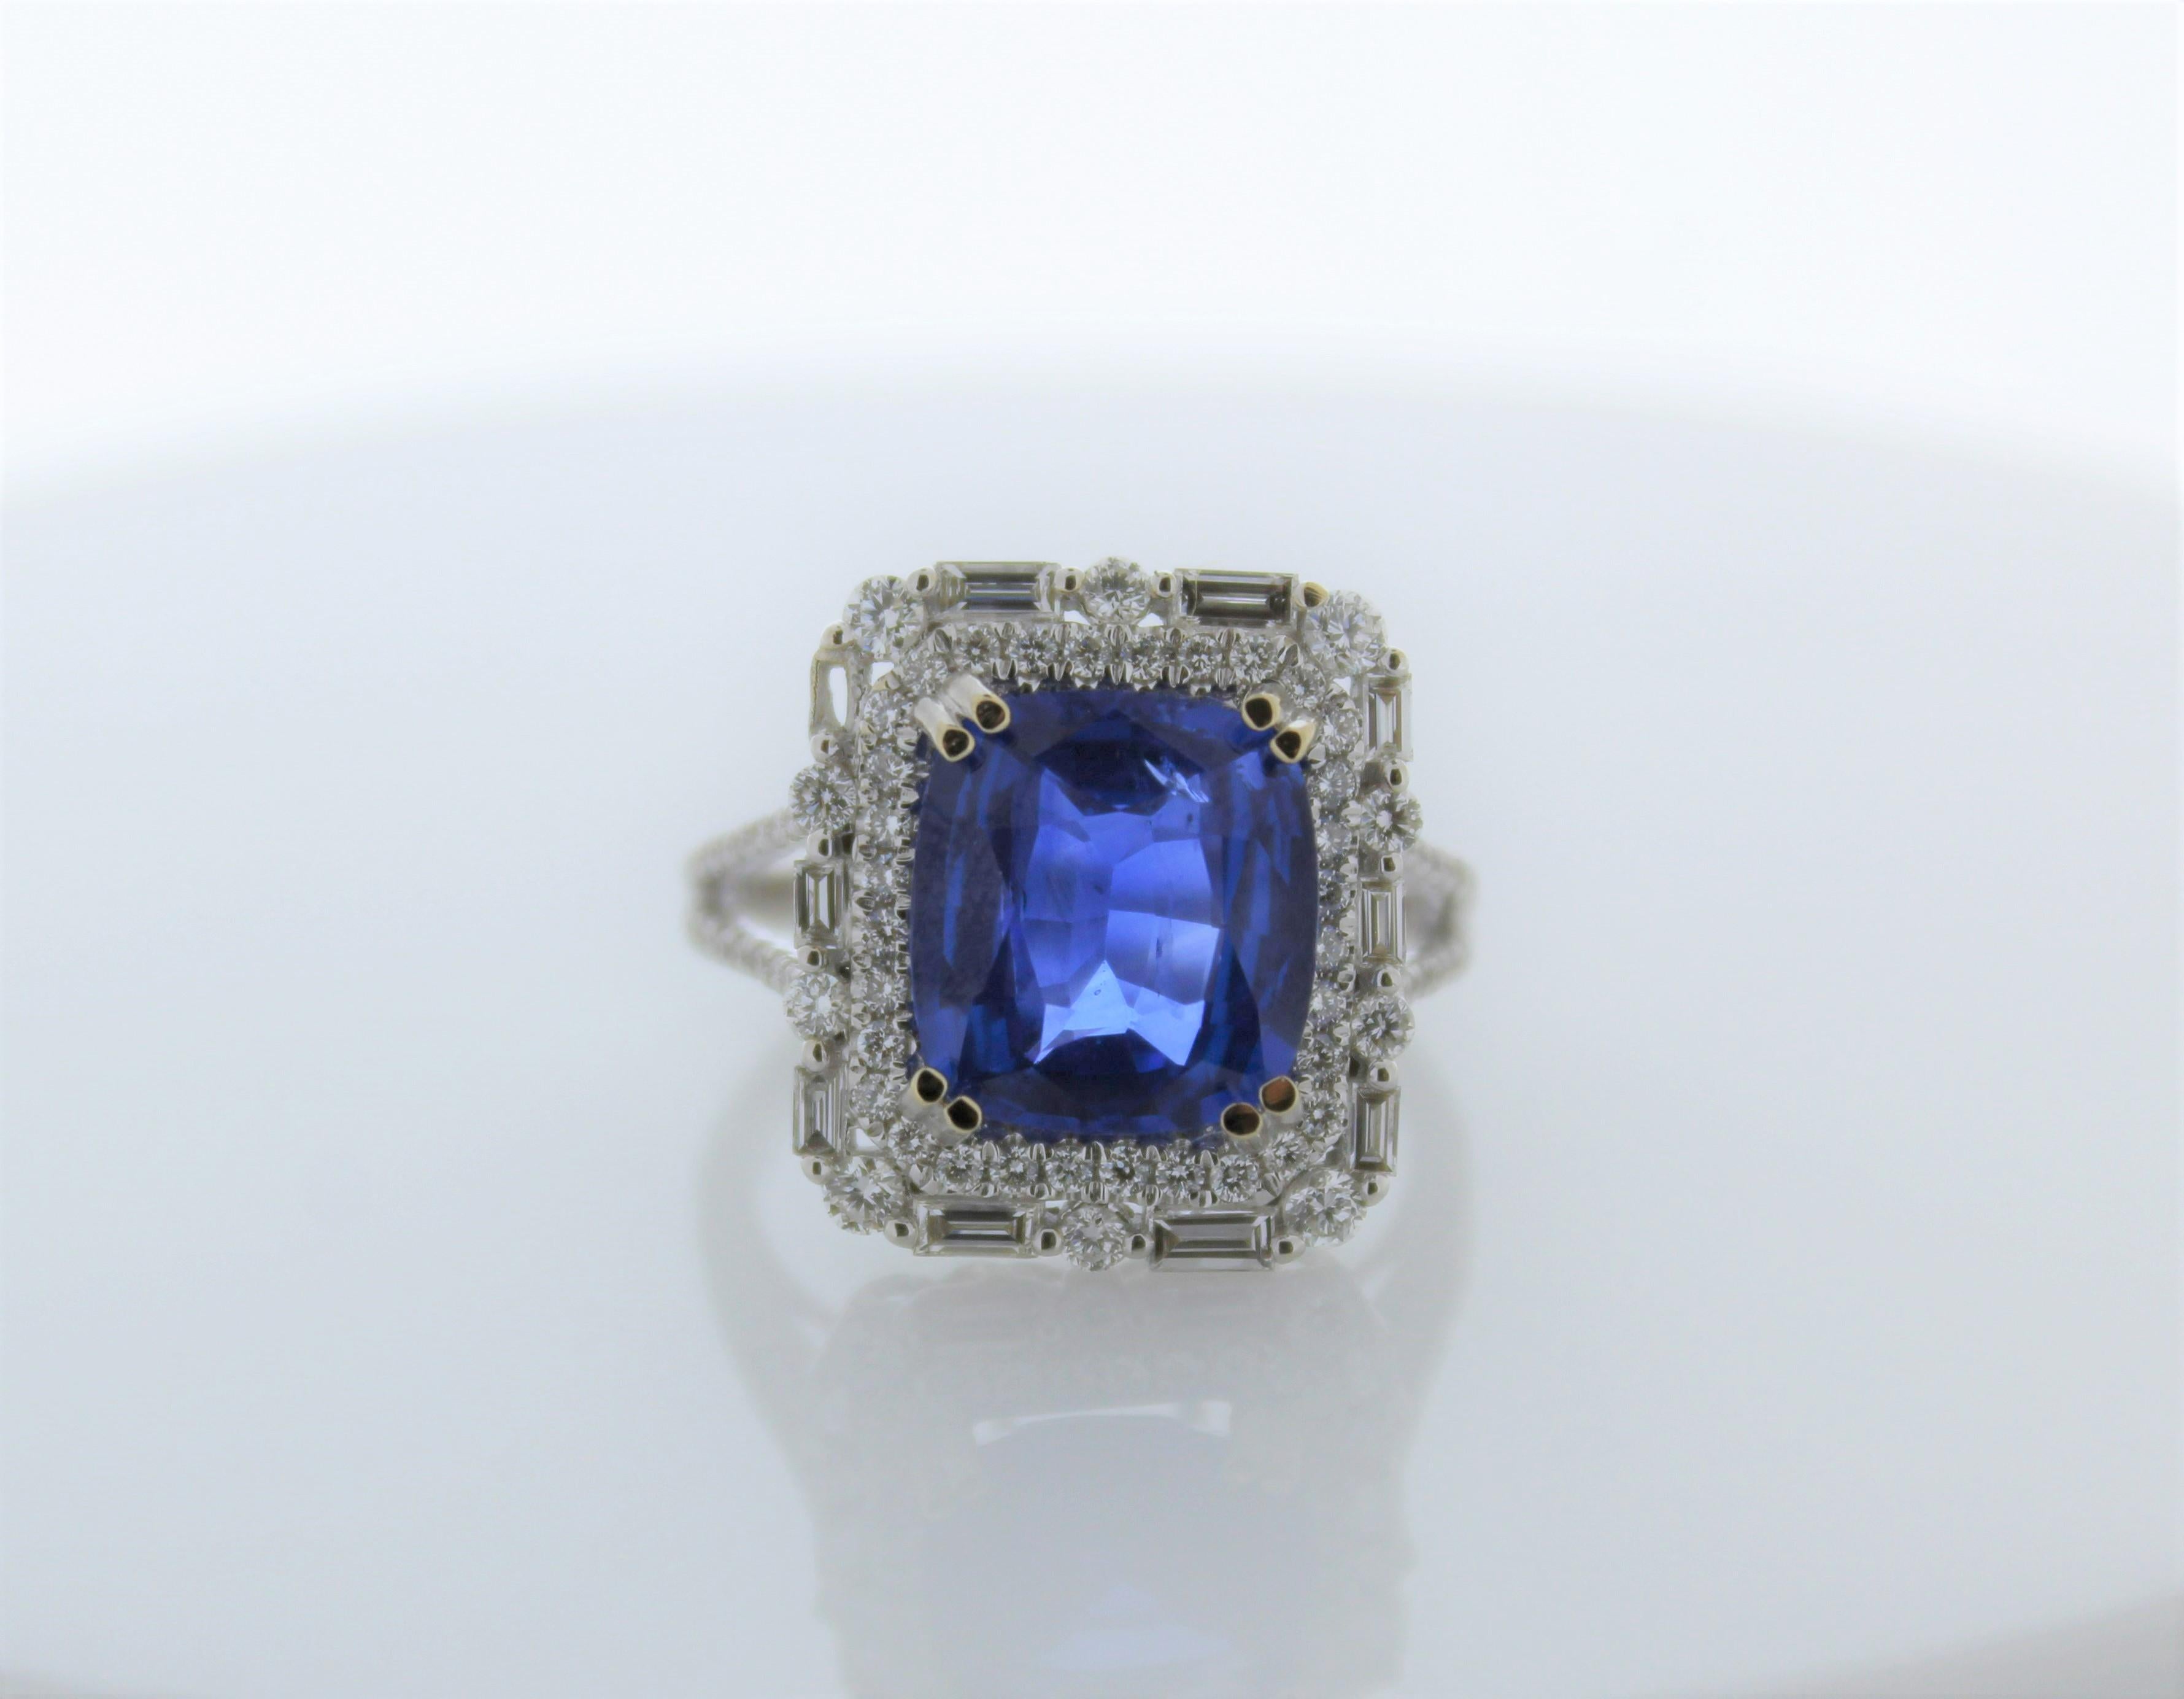 Contemporary 4.53ctw Blue Sapphire Cushion and 1.85ctw Diamond Ring in 18k White Gold For Sale